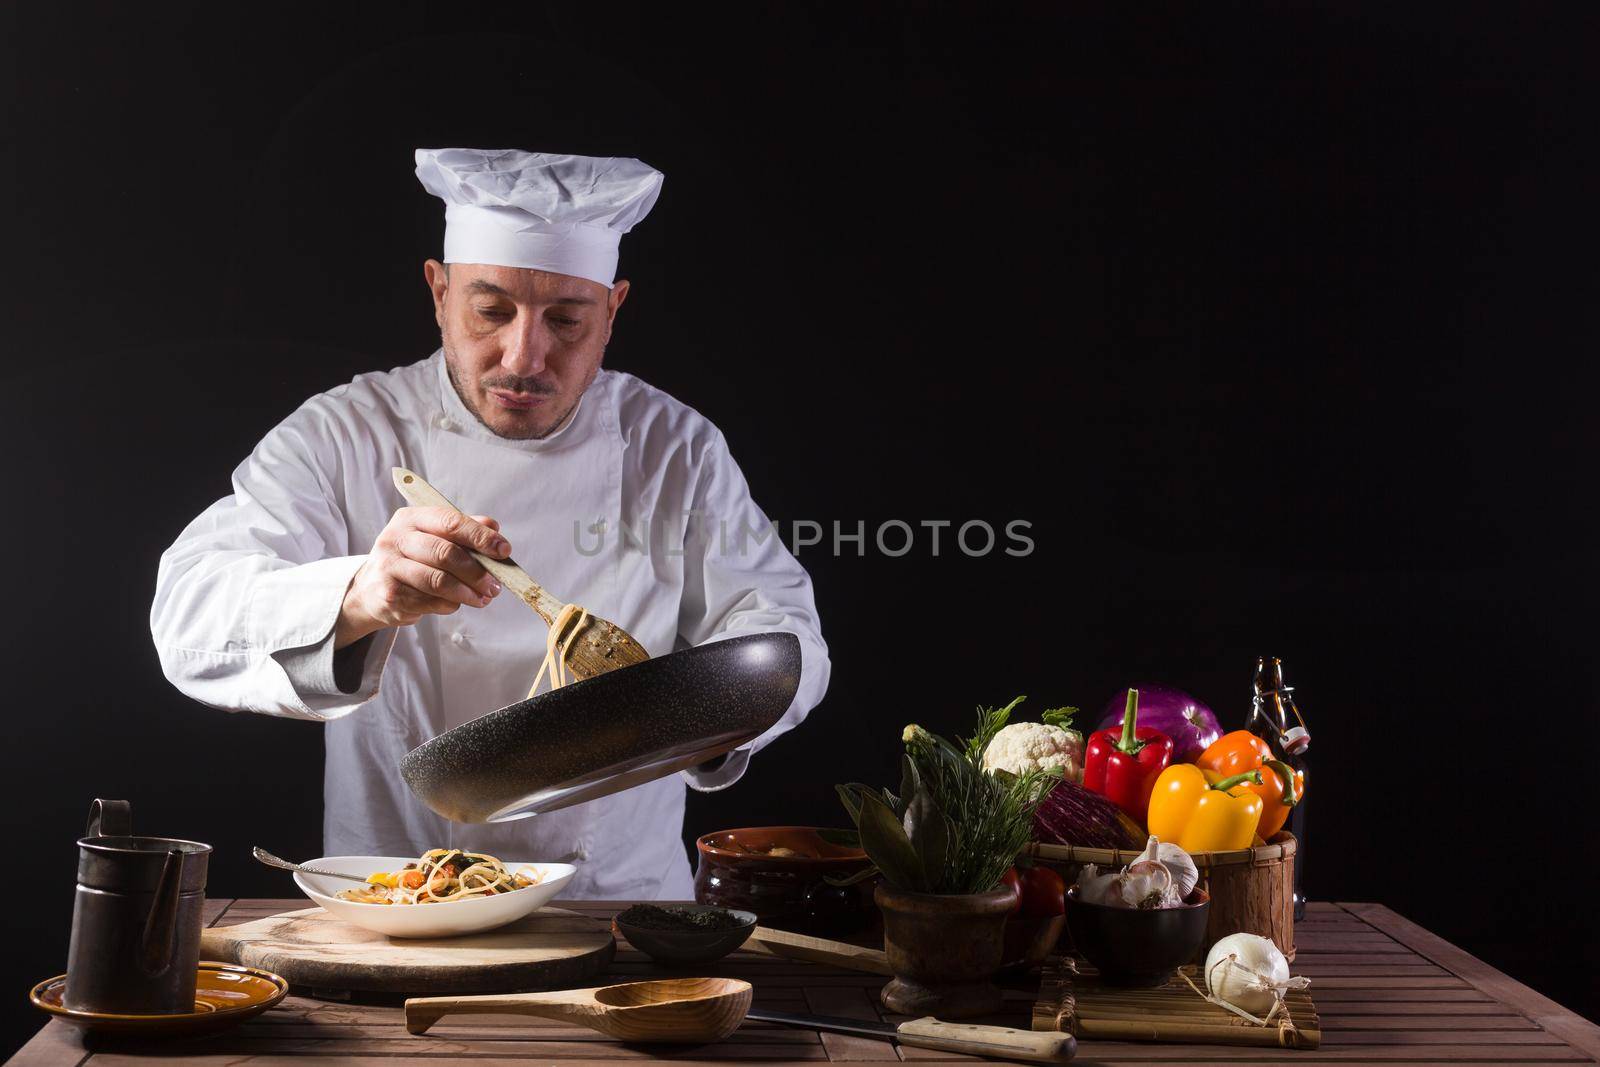 Male chef in white uniform prepares spaghetti with vegetables on the dish before serving while working in a restaurant kitchen